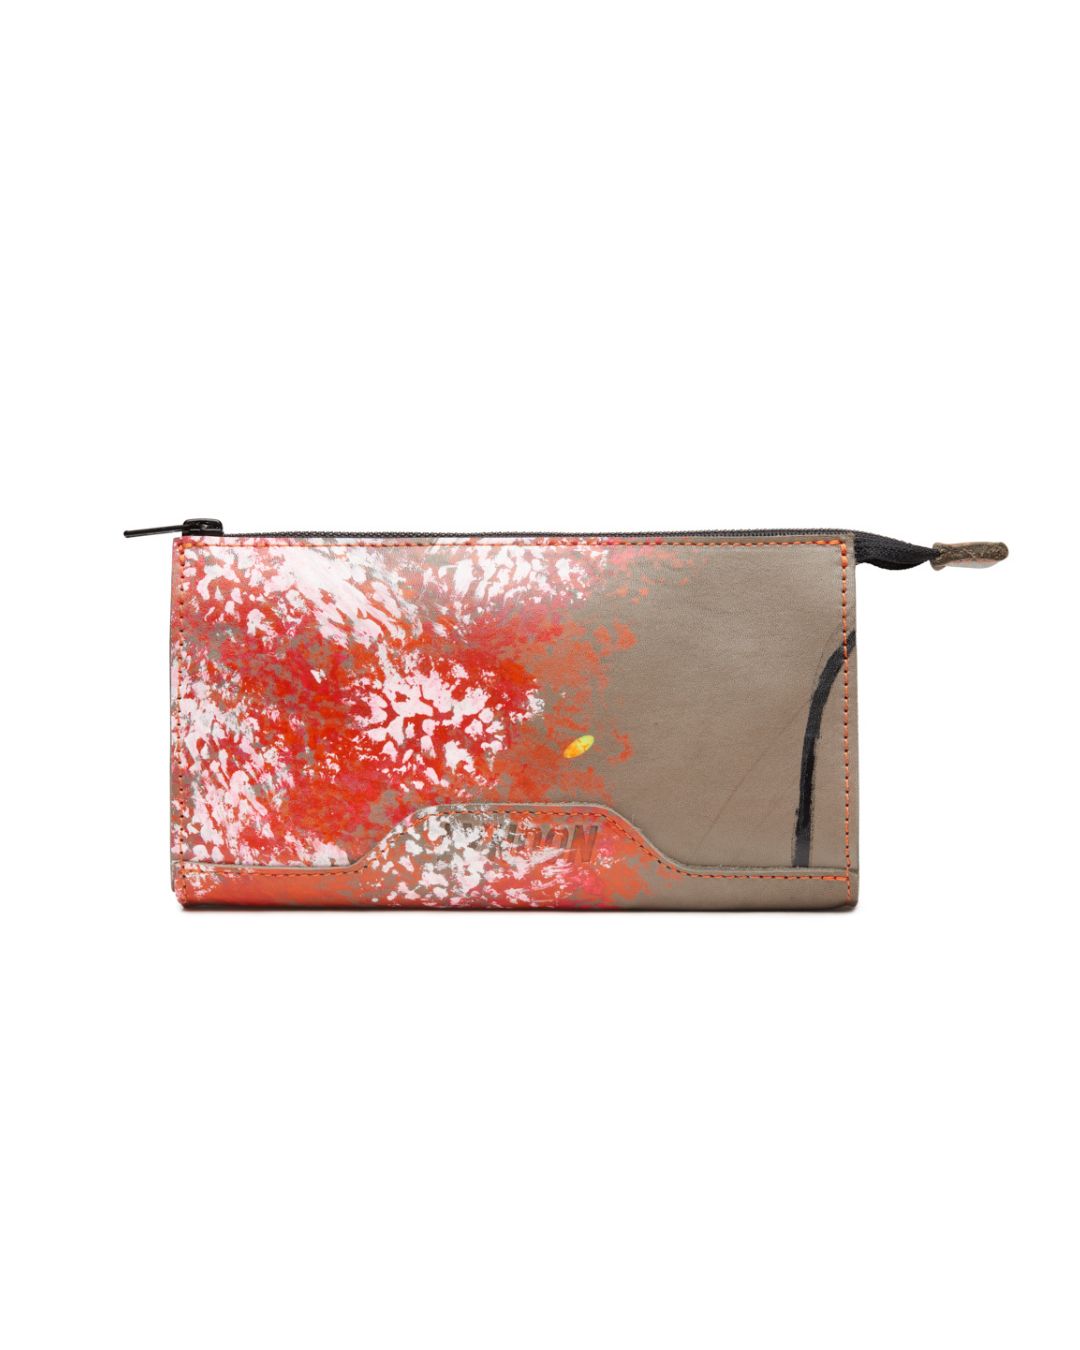 Firefly Blossom Leather Wallet